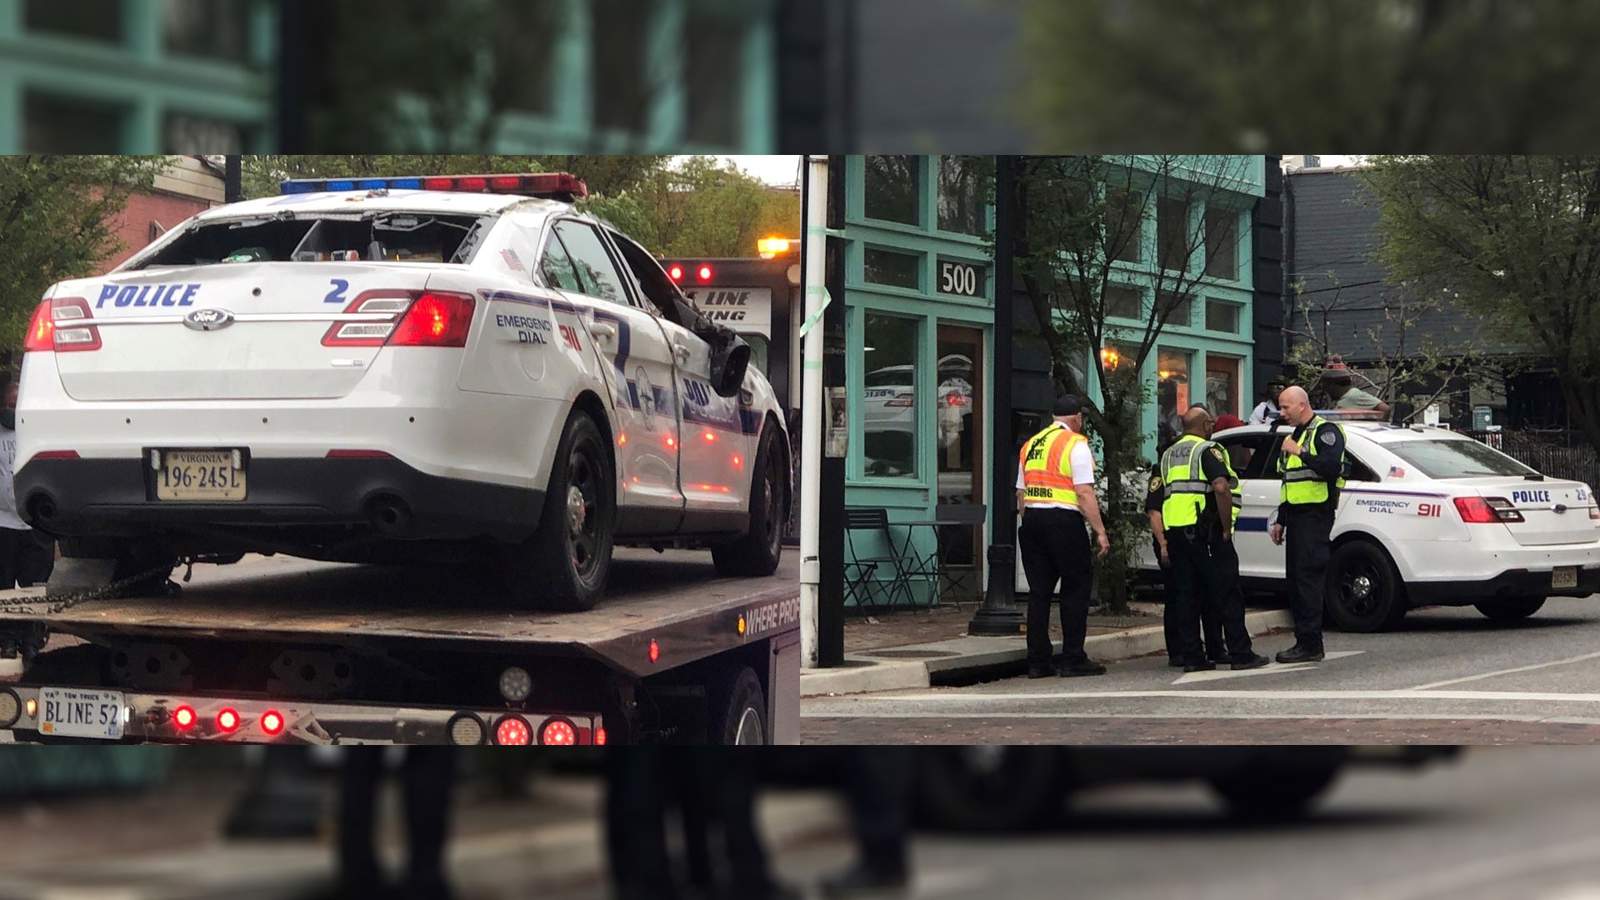 One officer hospitalized after Lynchburg police vehicles involved in downtown crash